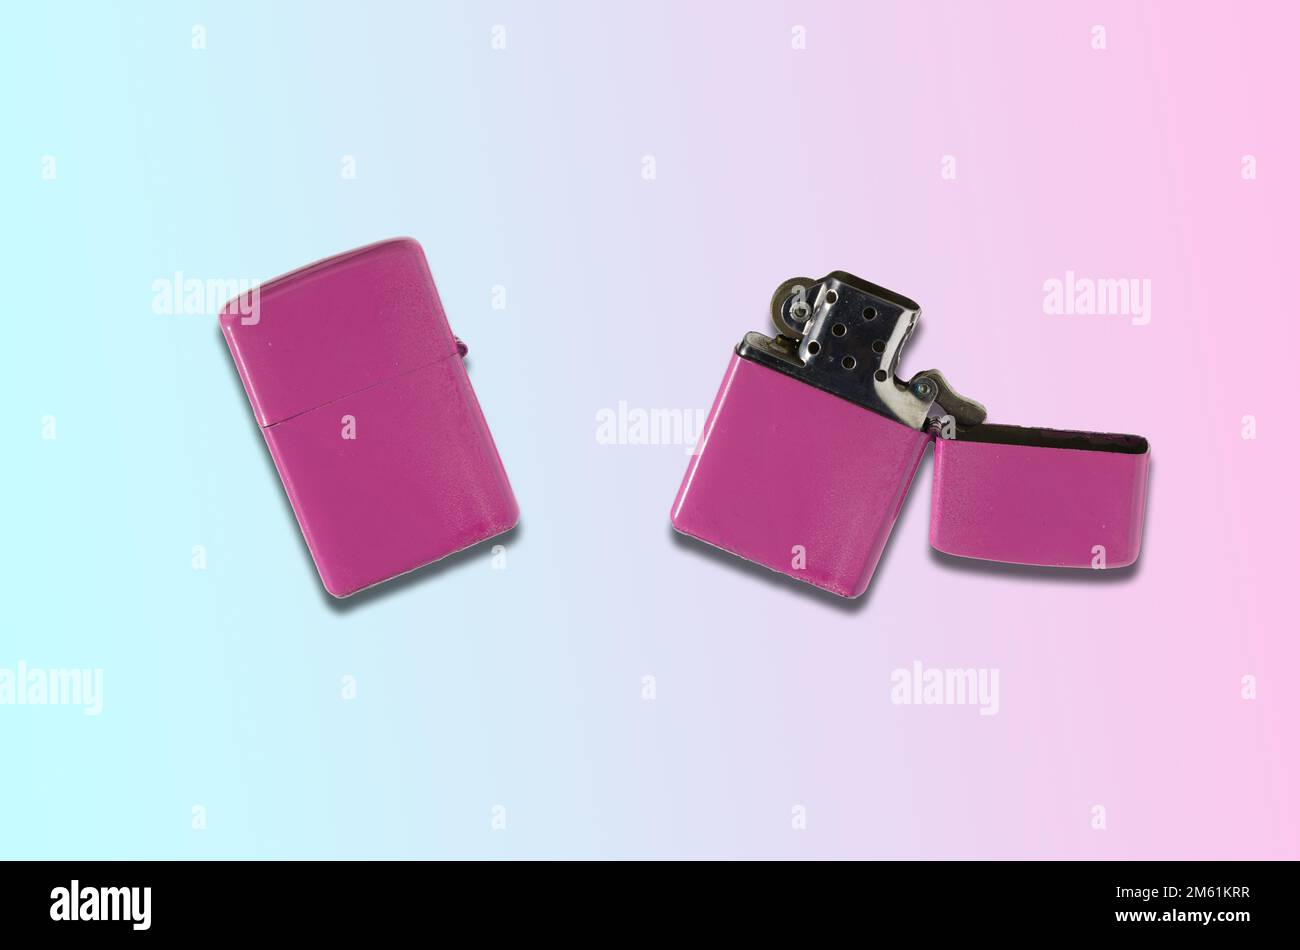 pink lighter closed and open on blue background, creative holiday design Stock Photo